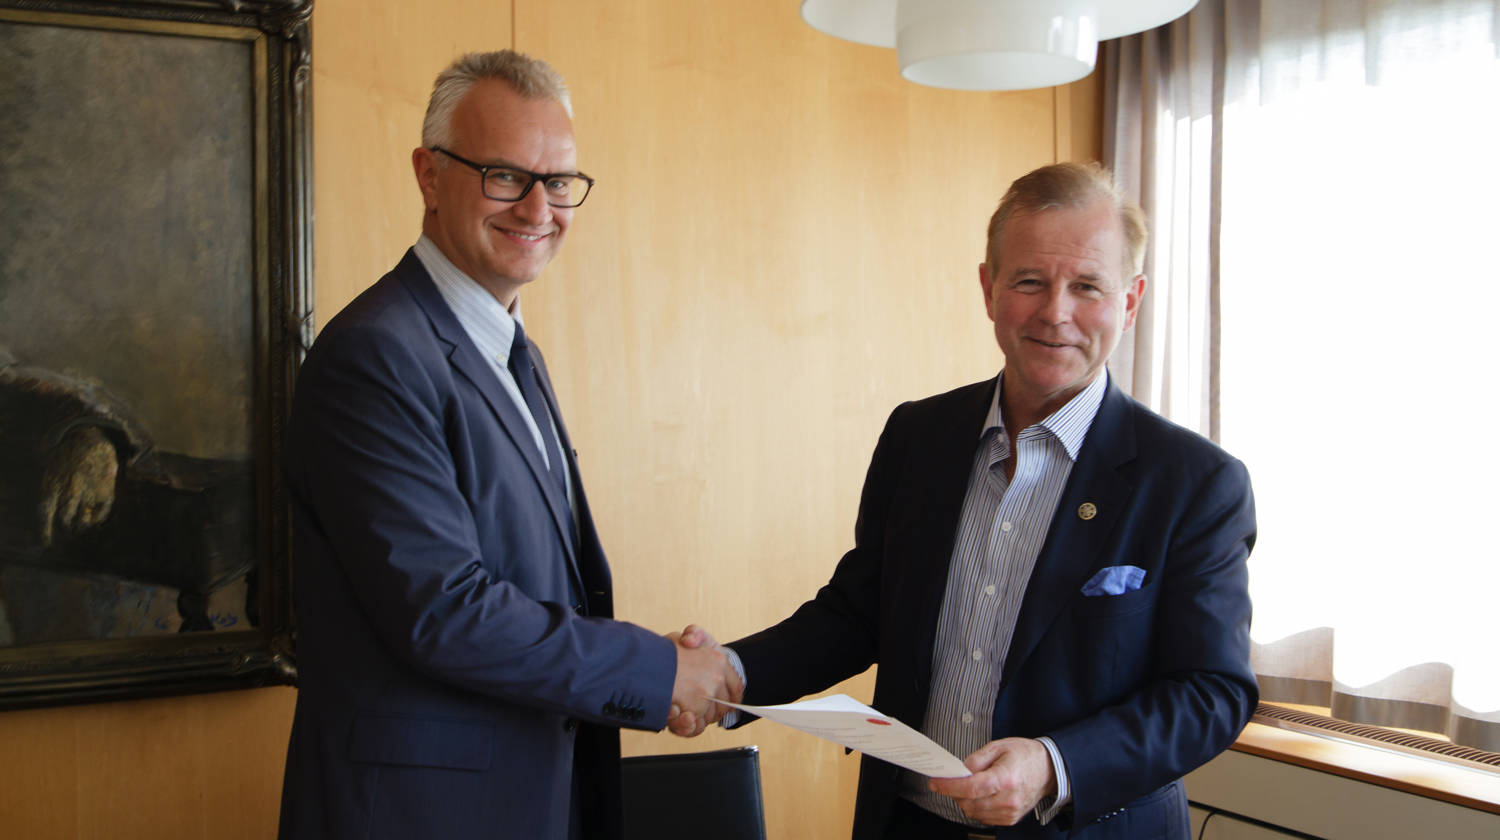 Signing of MoU between PRIO and the University of Oslo 8 Sep 2016, represented by PRIO Director Kristian Berg Haprviken and the Rector of Uio, Ole Petter Ottersen. Martin Tegnander / PRIO